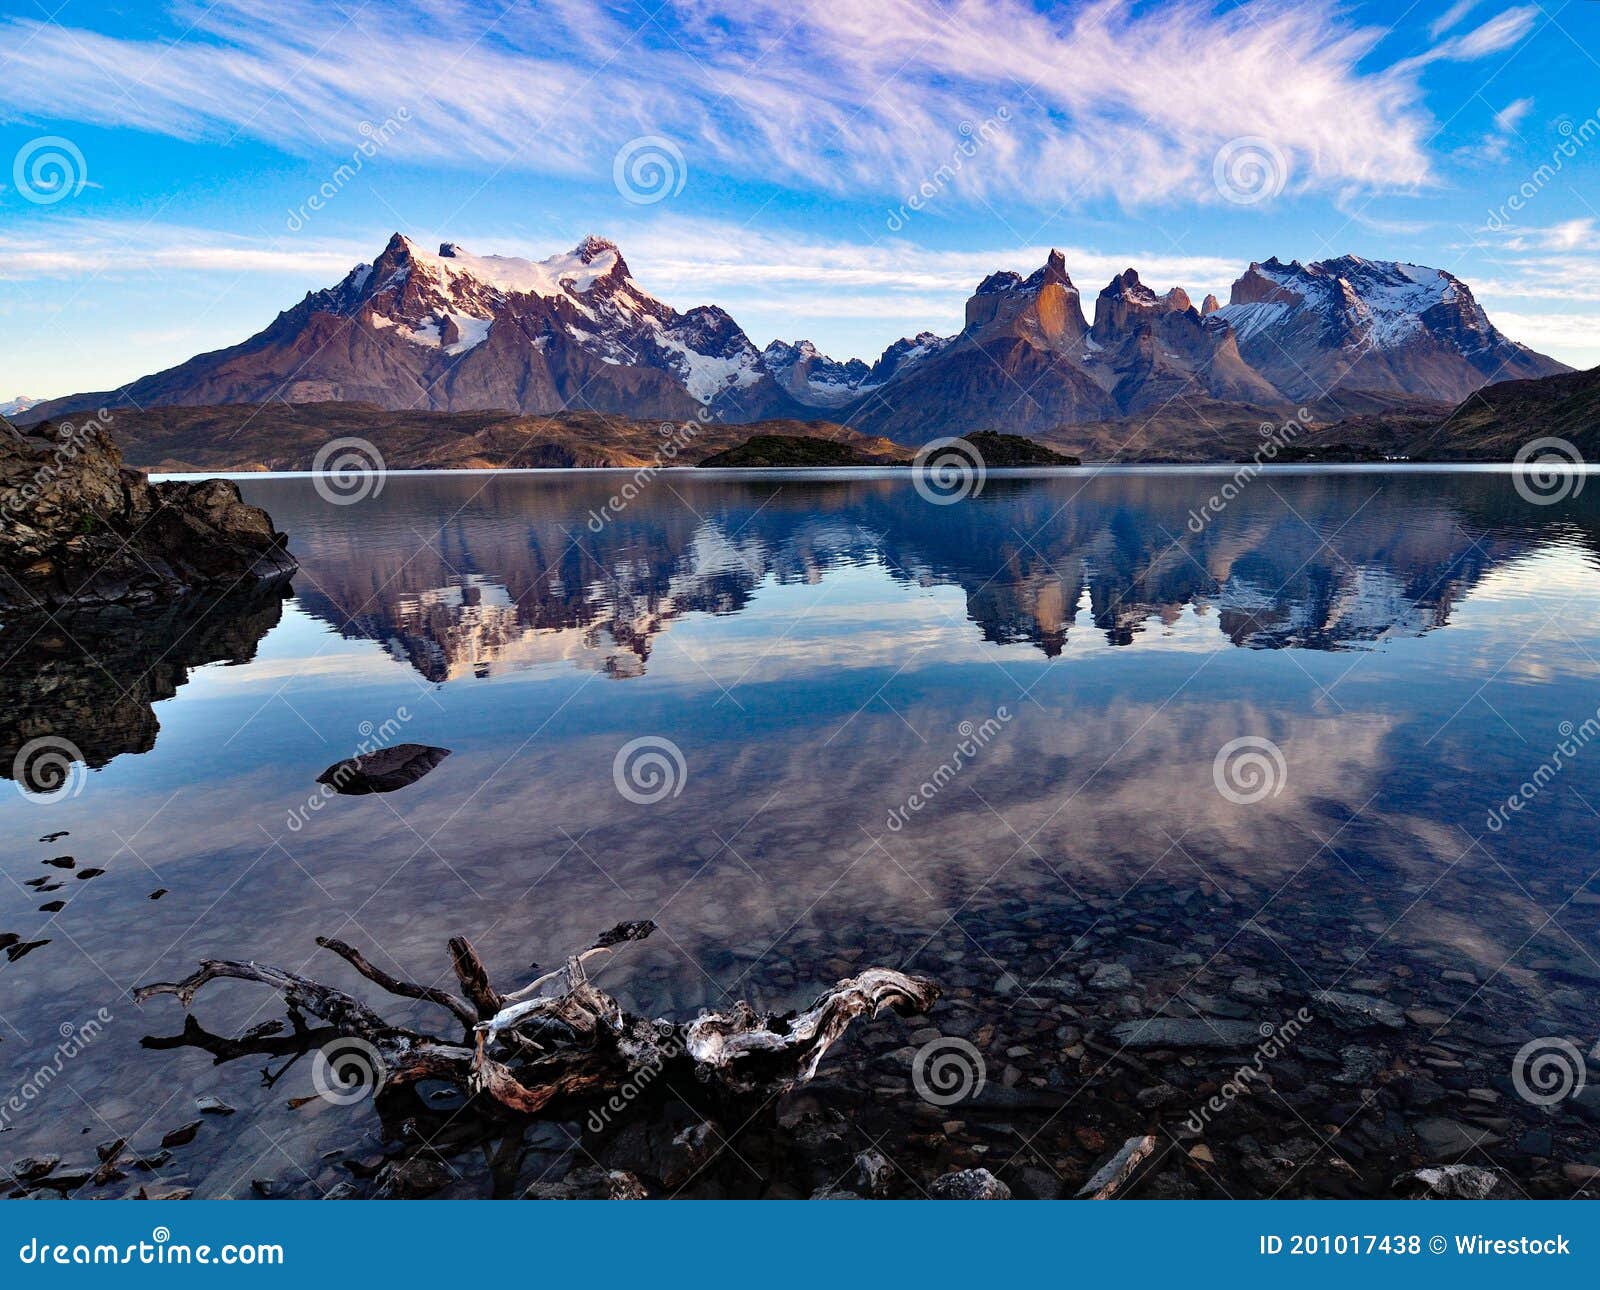 morning at lago pehoe lake, torres del paine national park